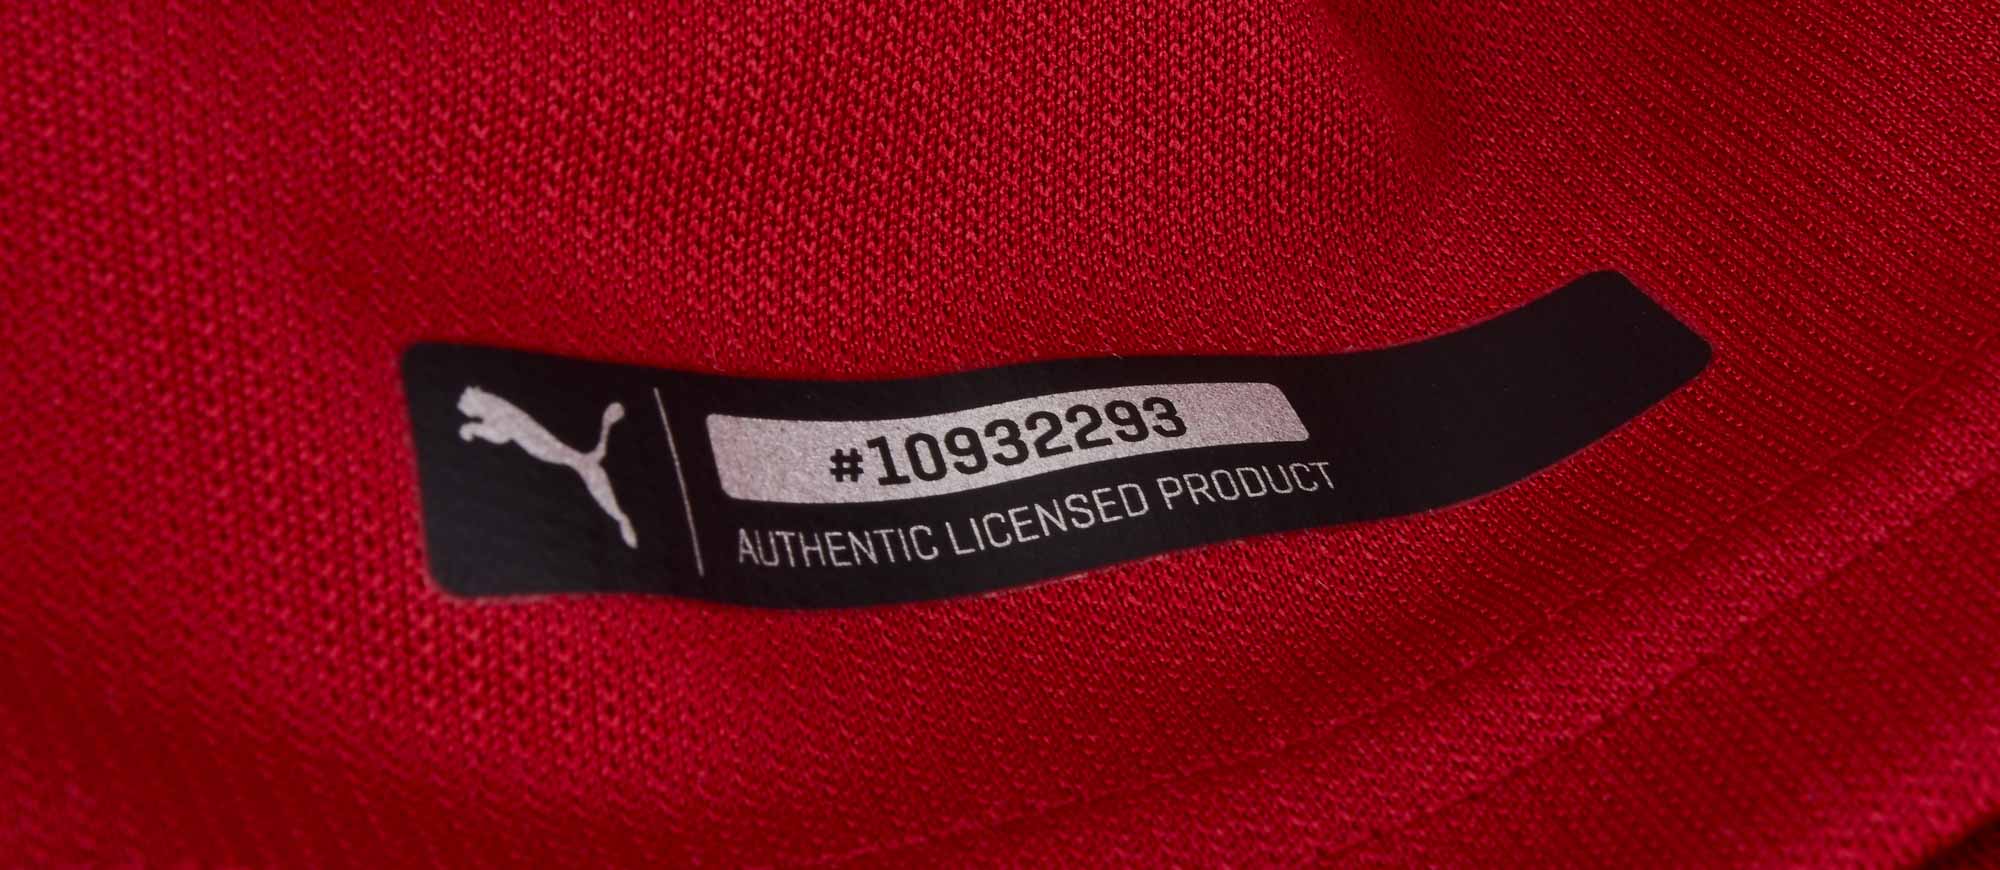 puma licensed products